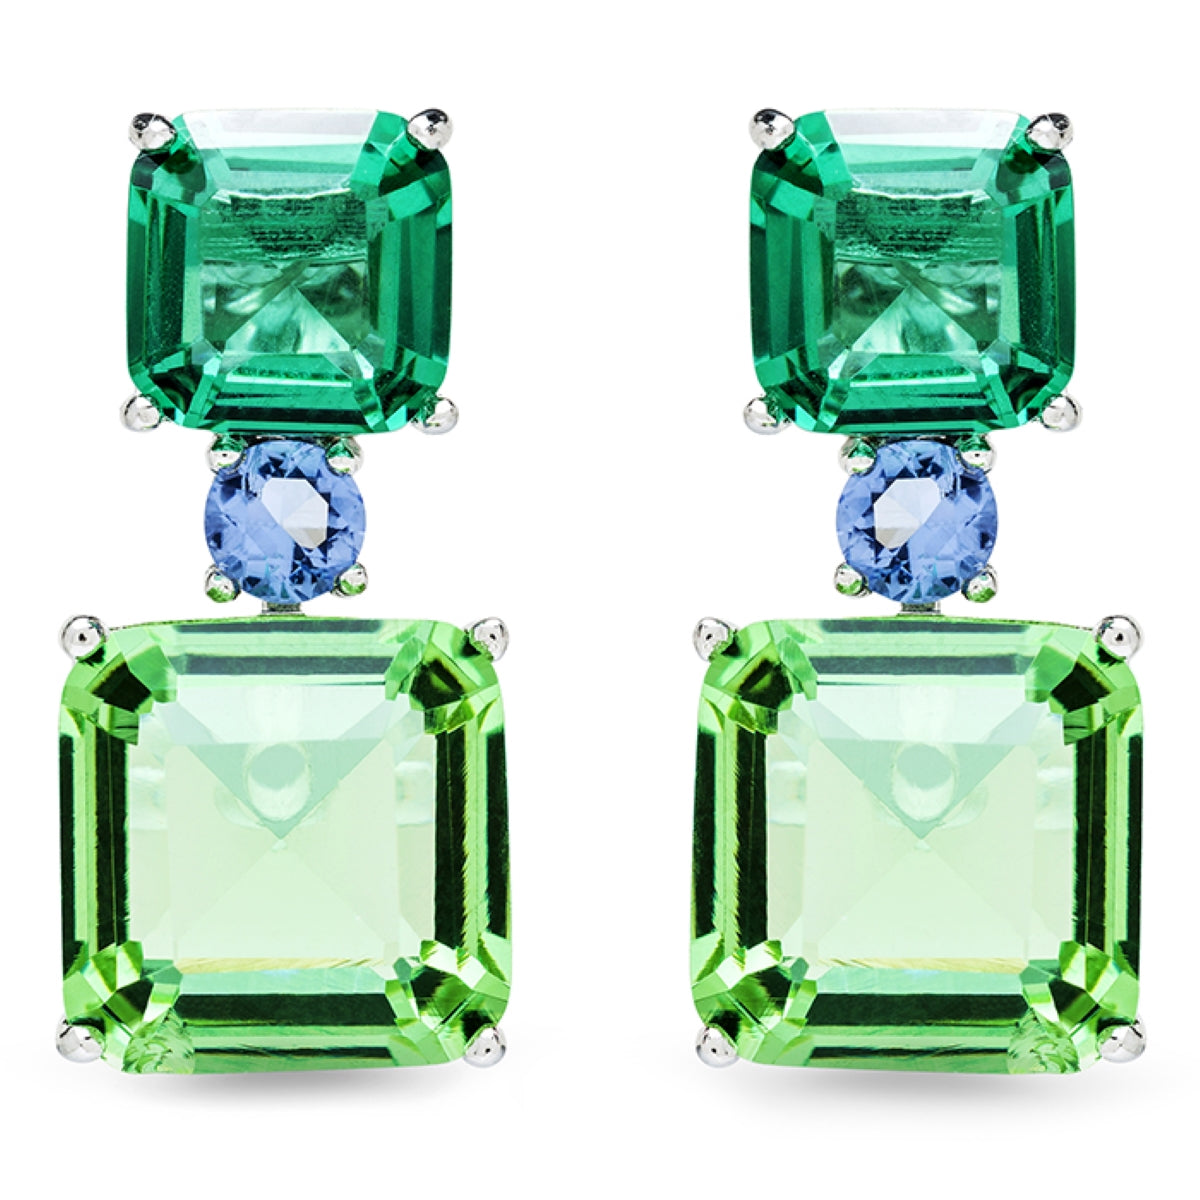 Losde Silver, Green CH and Blue CH Earrings